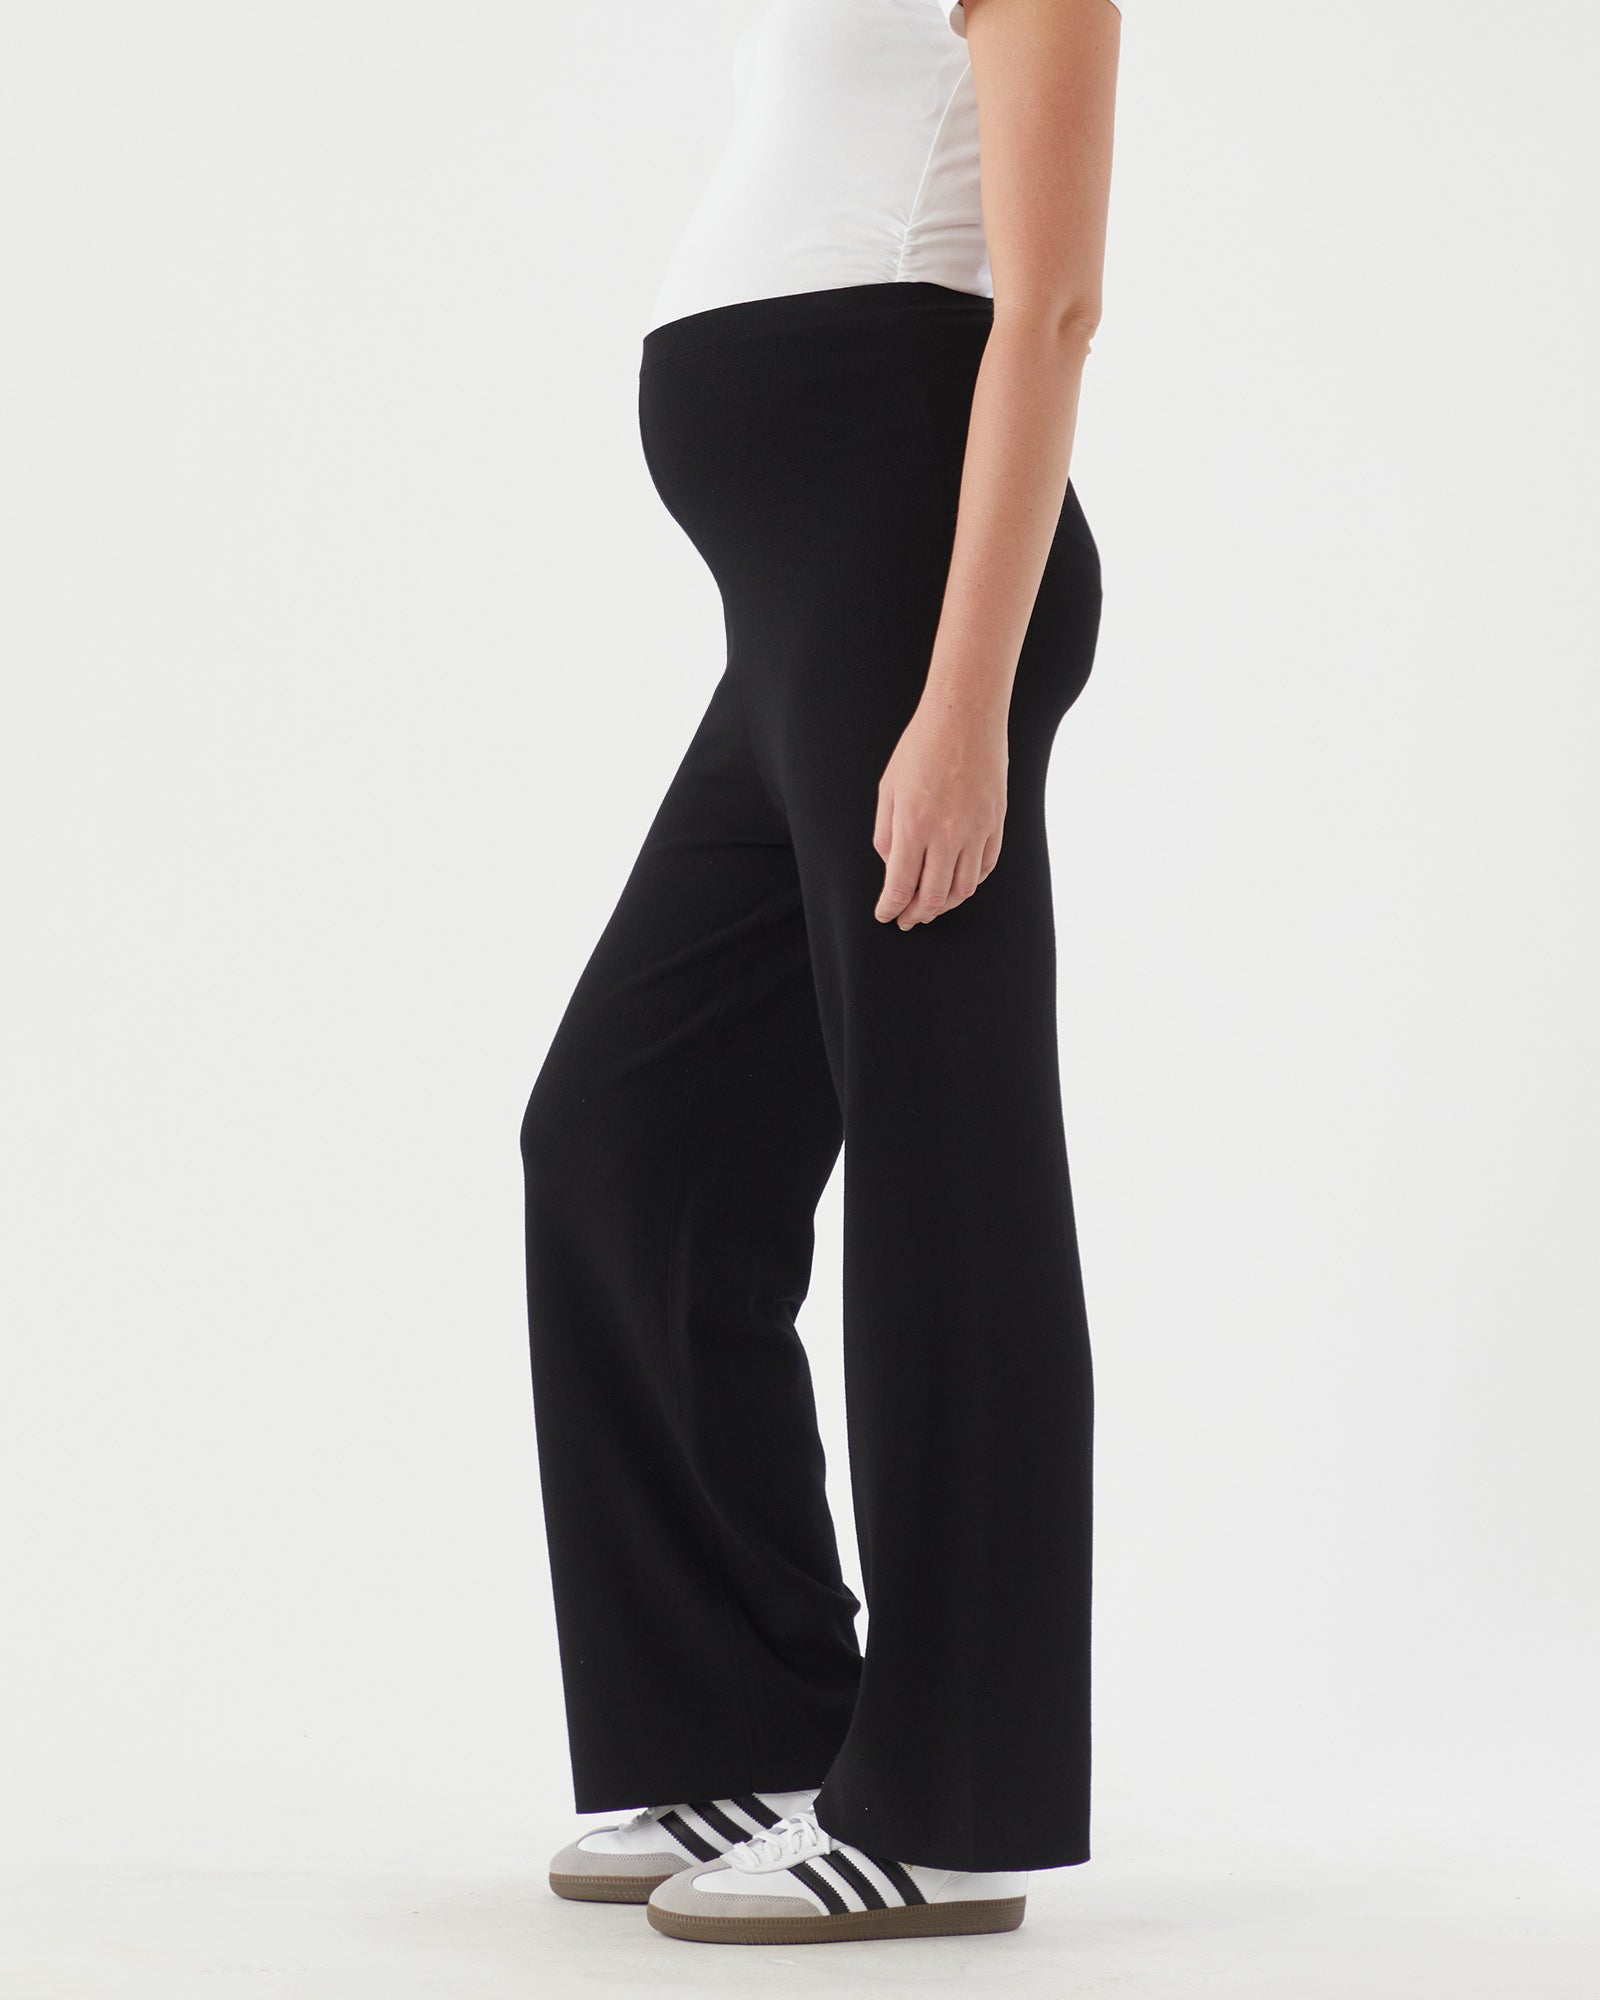 The Knit Straight Pants